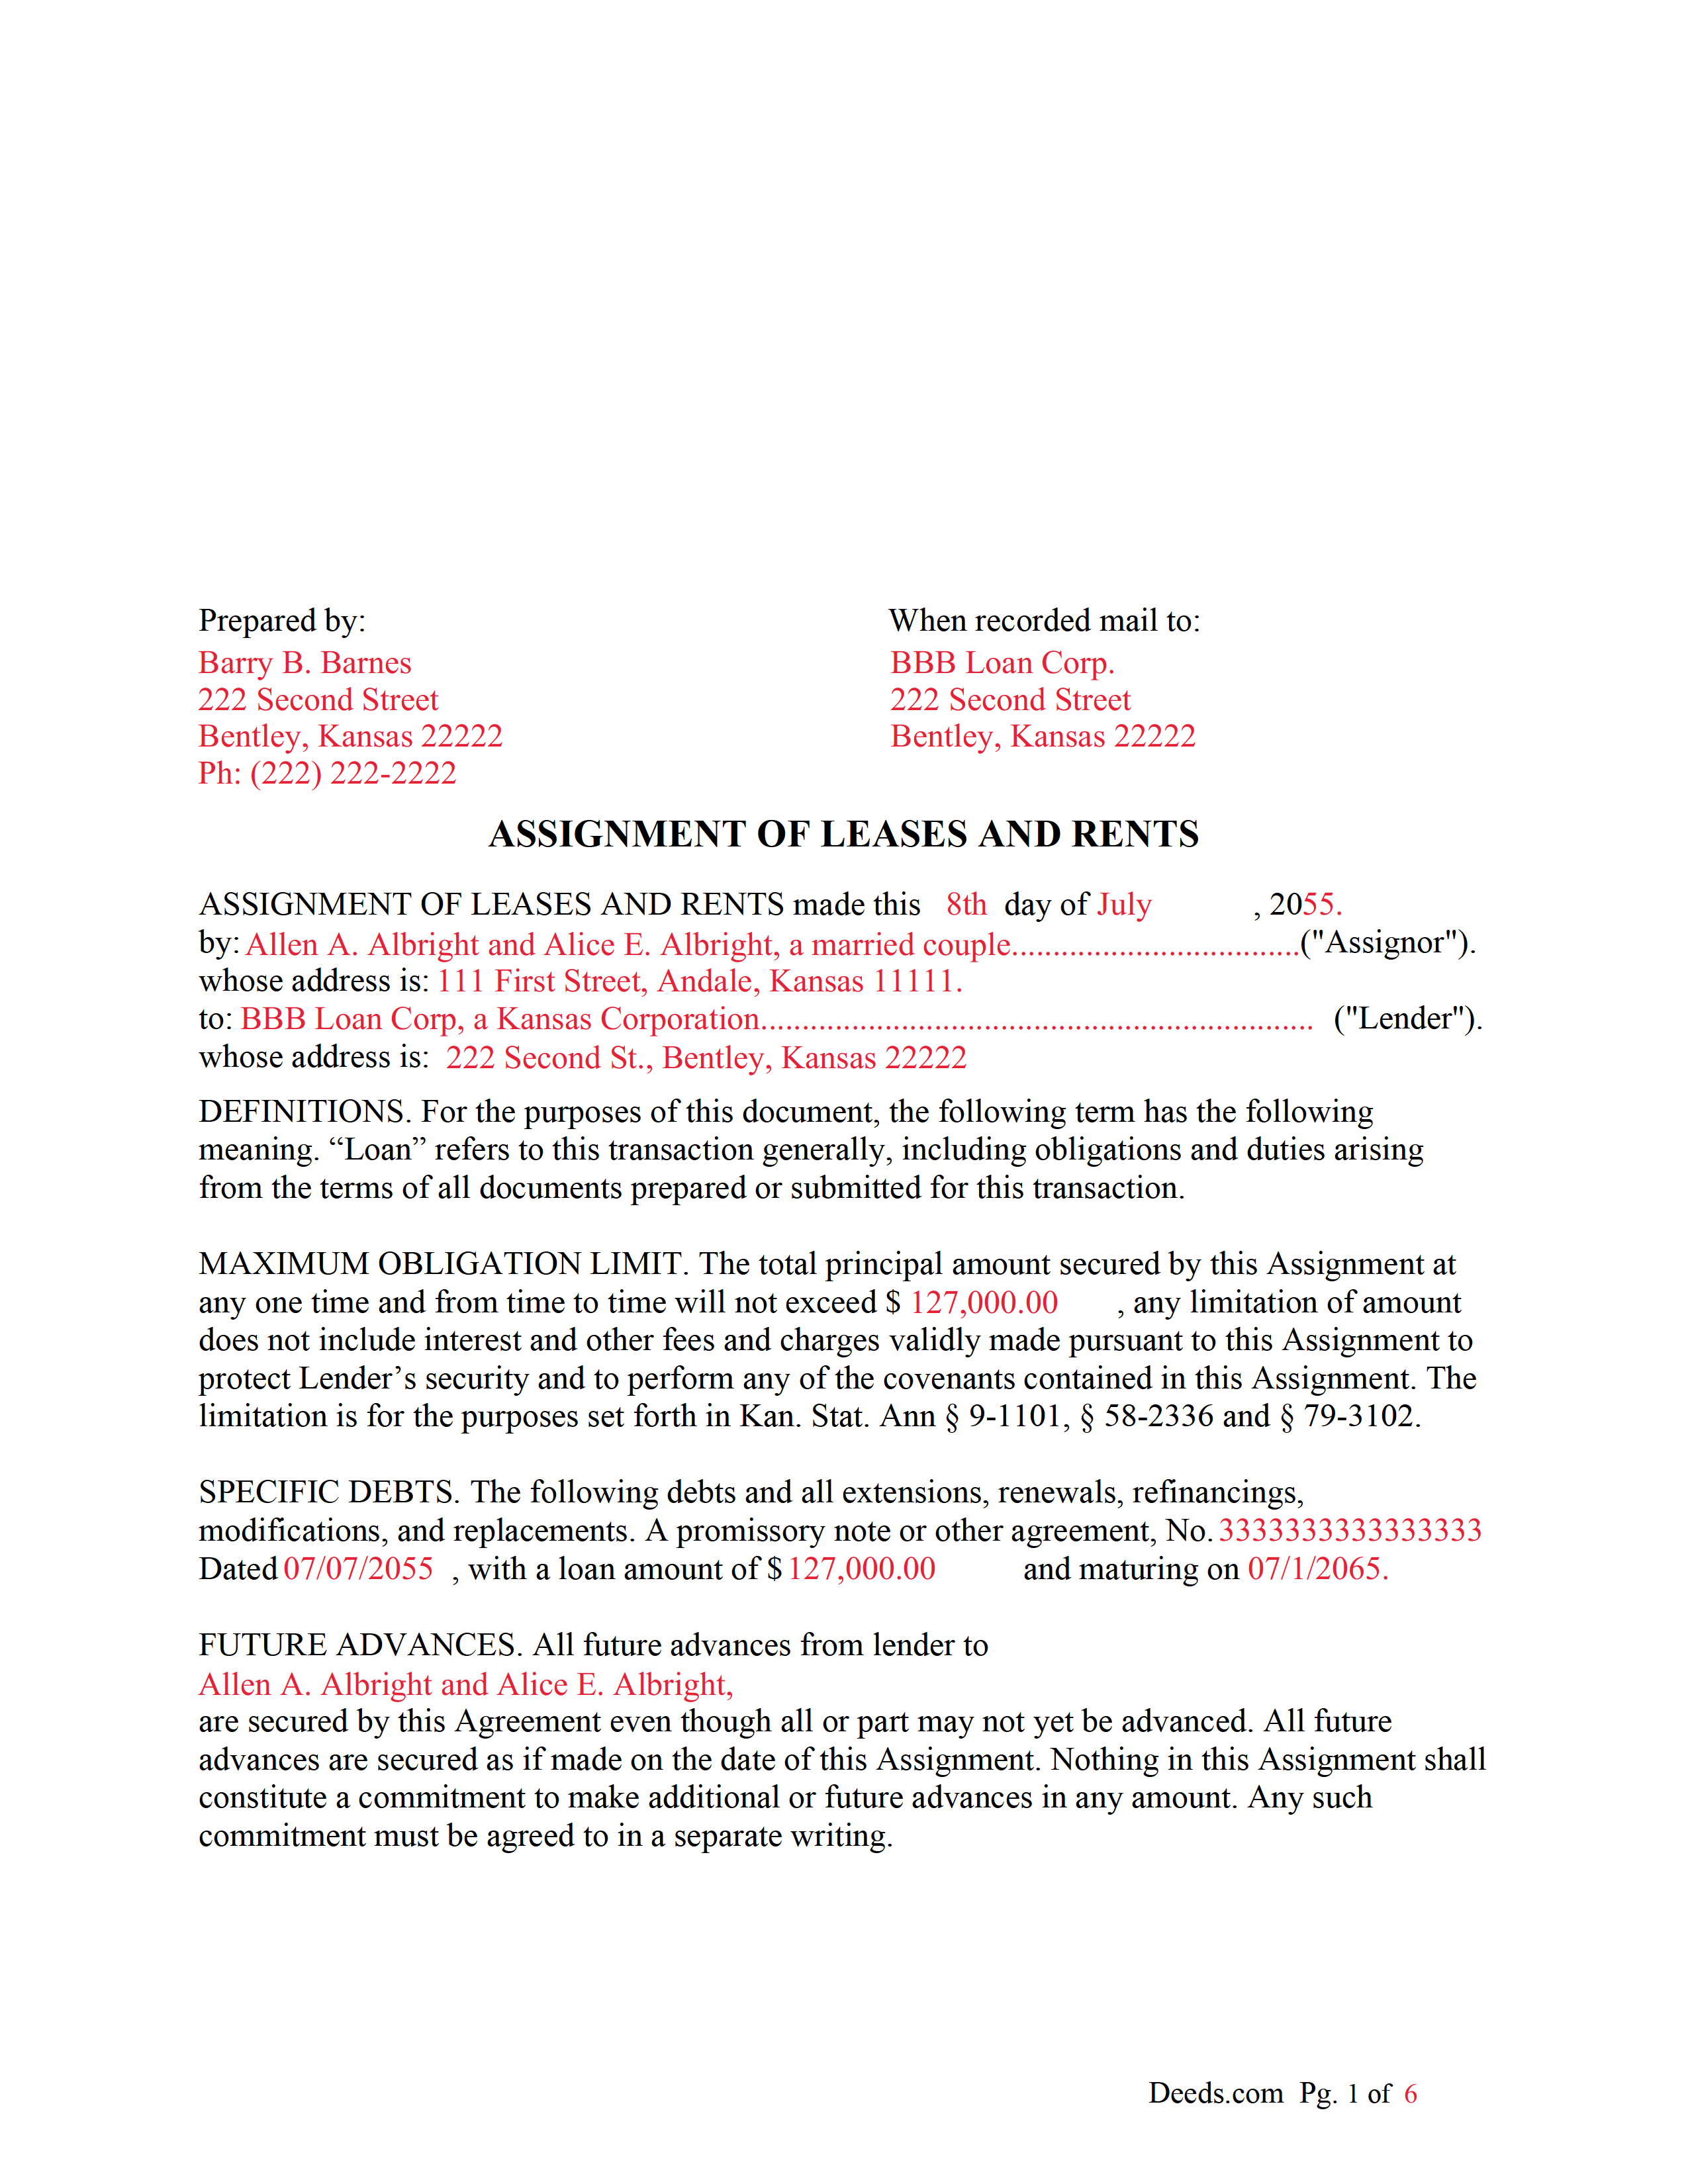 Ottawa County Completed Example of the Assignment of Leases and Rents Document